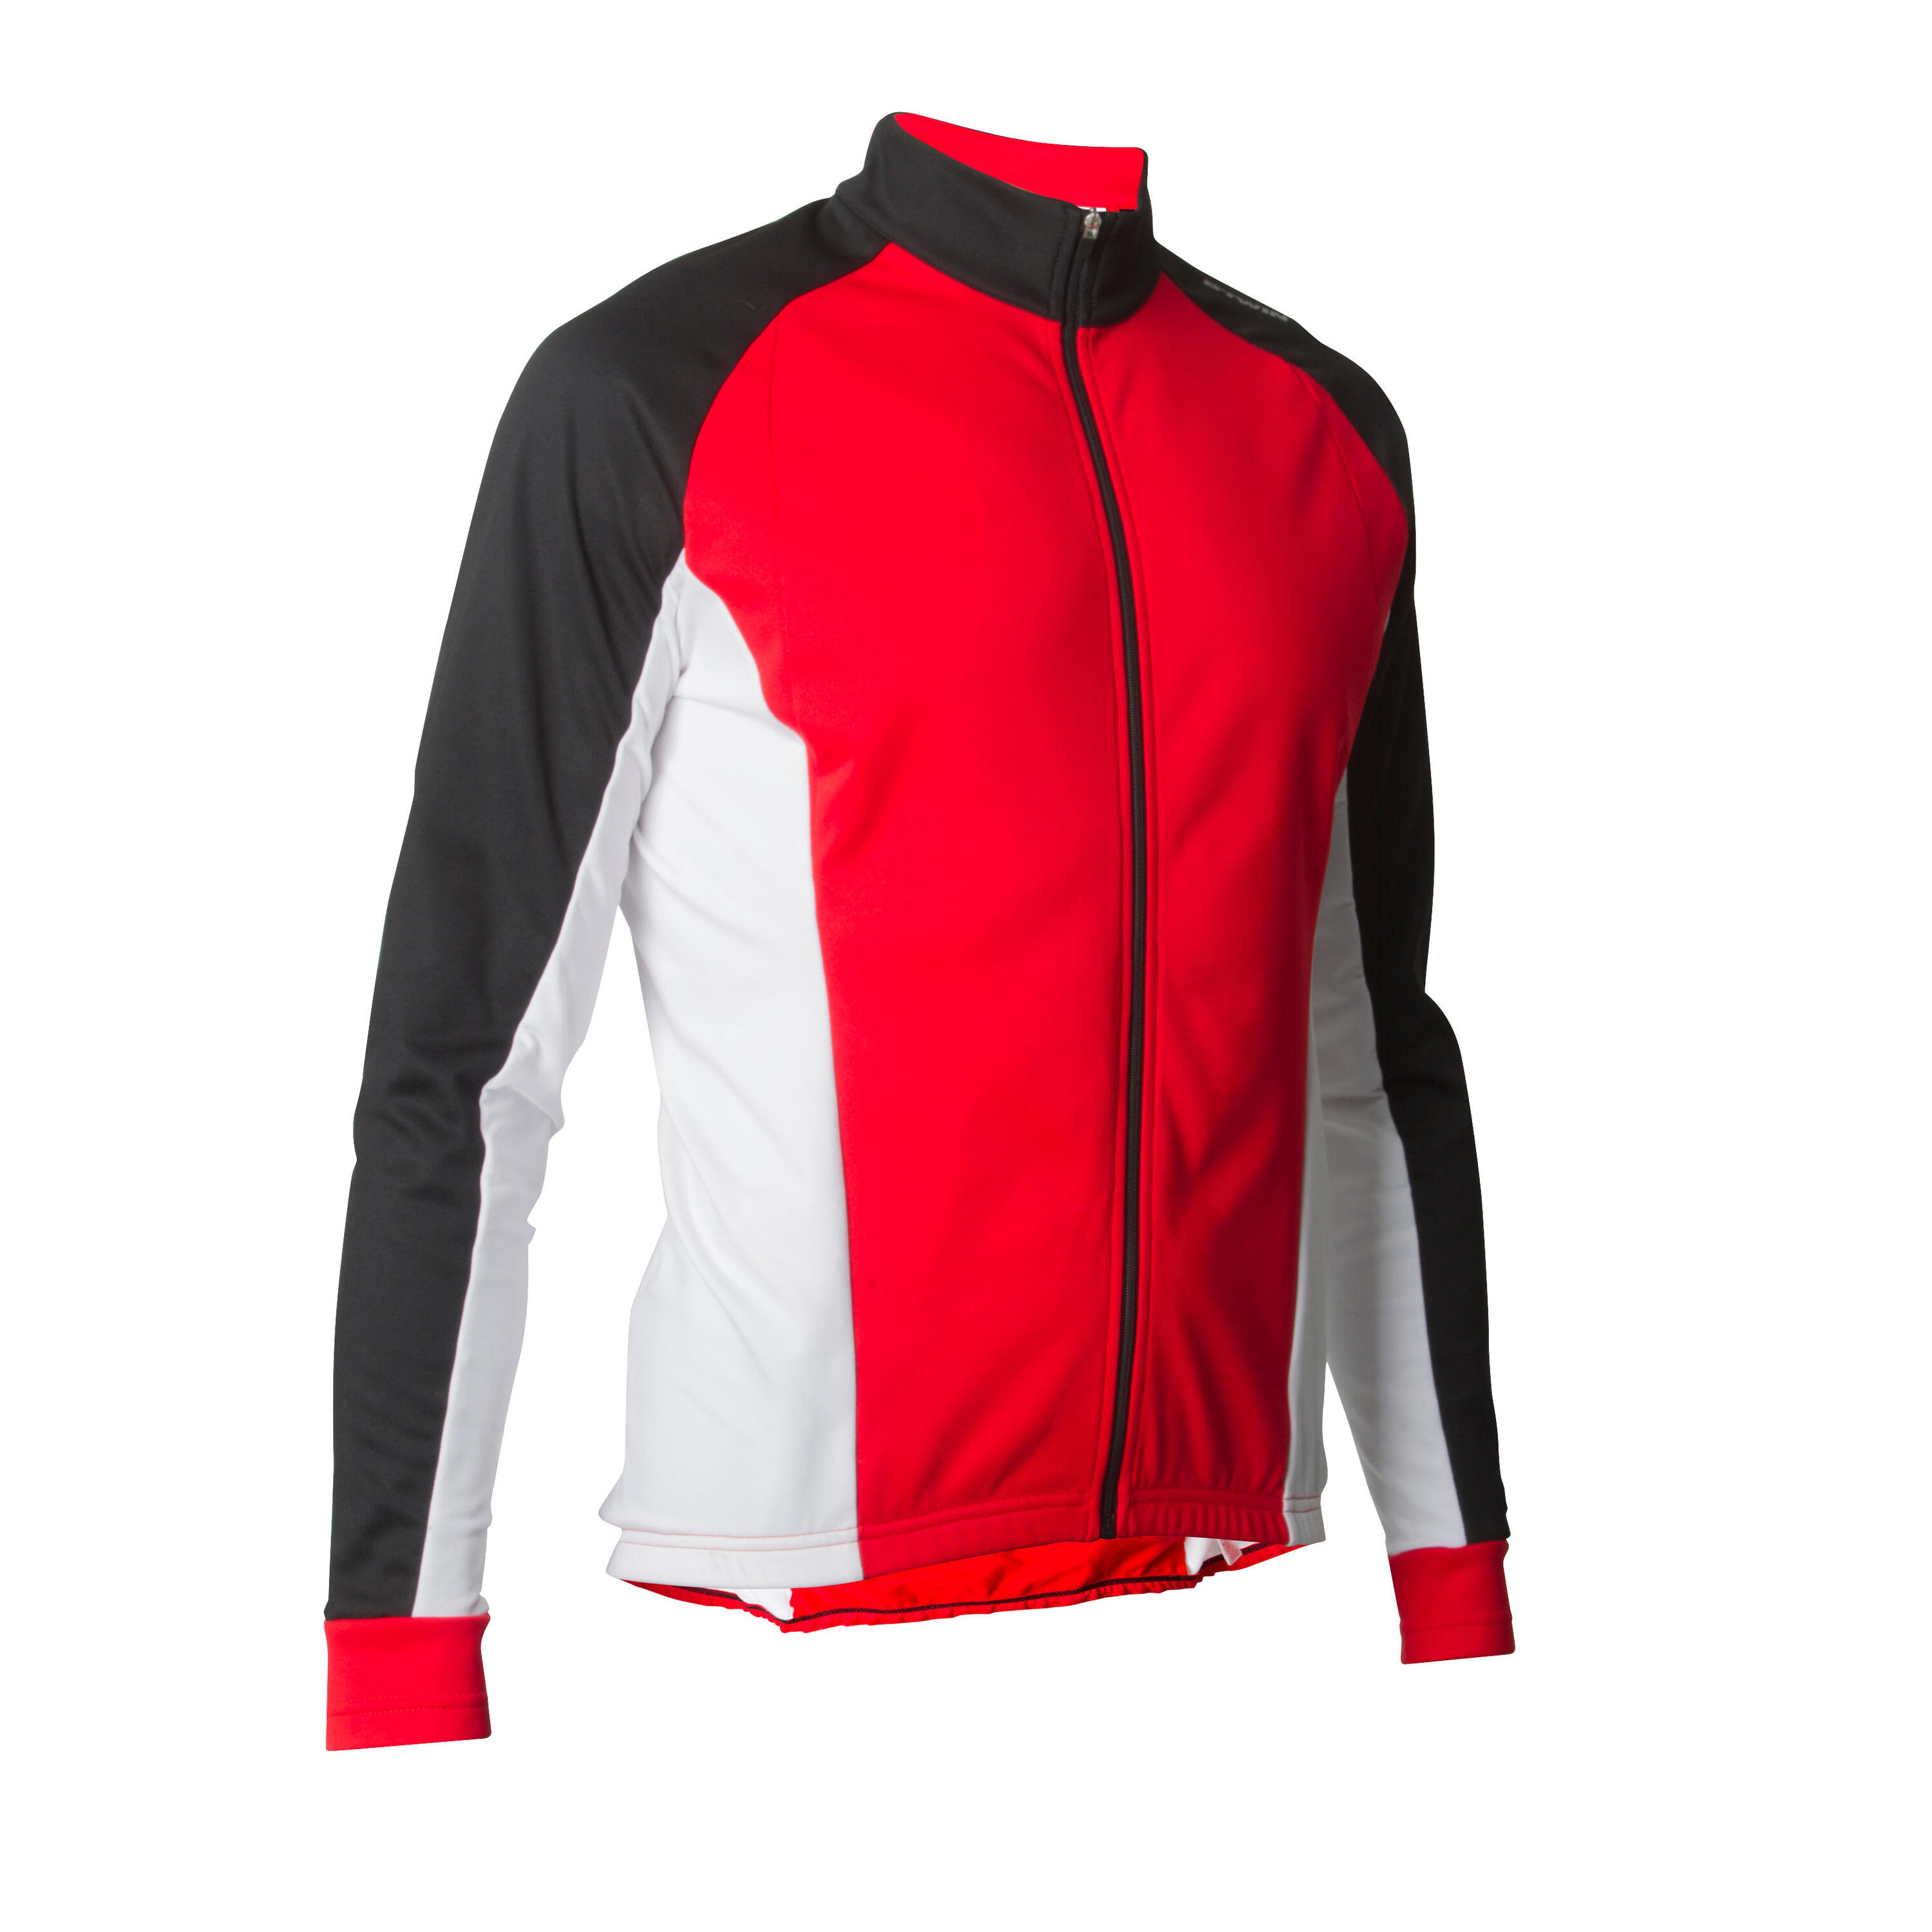 BTWIN 500 Long-Sleeved Cycling Jersey - Red/Black